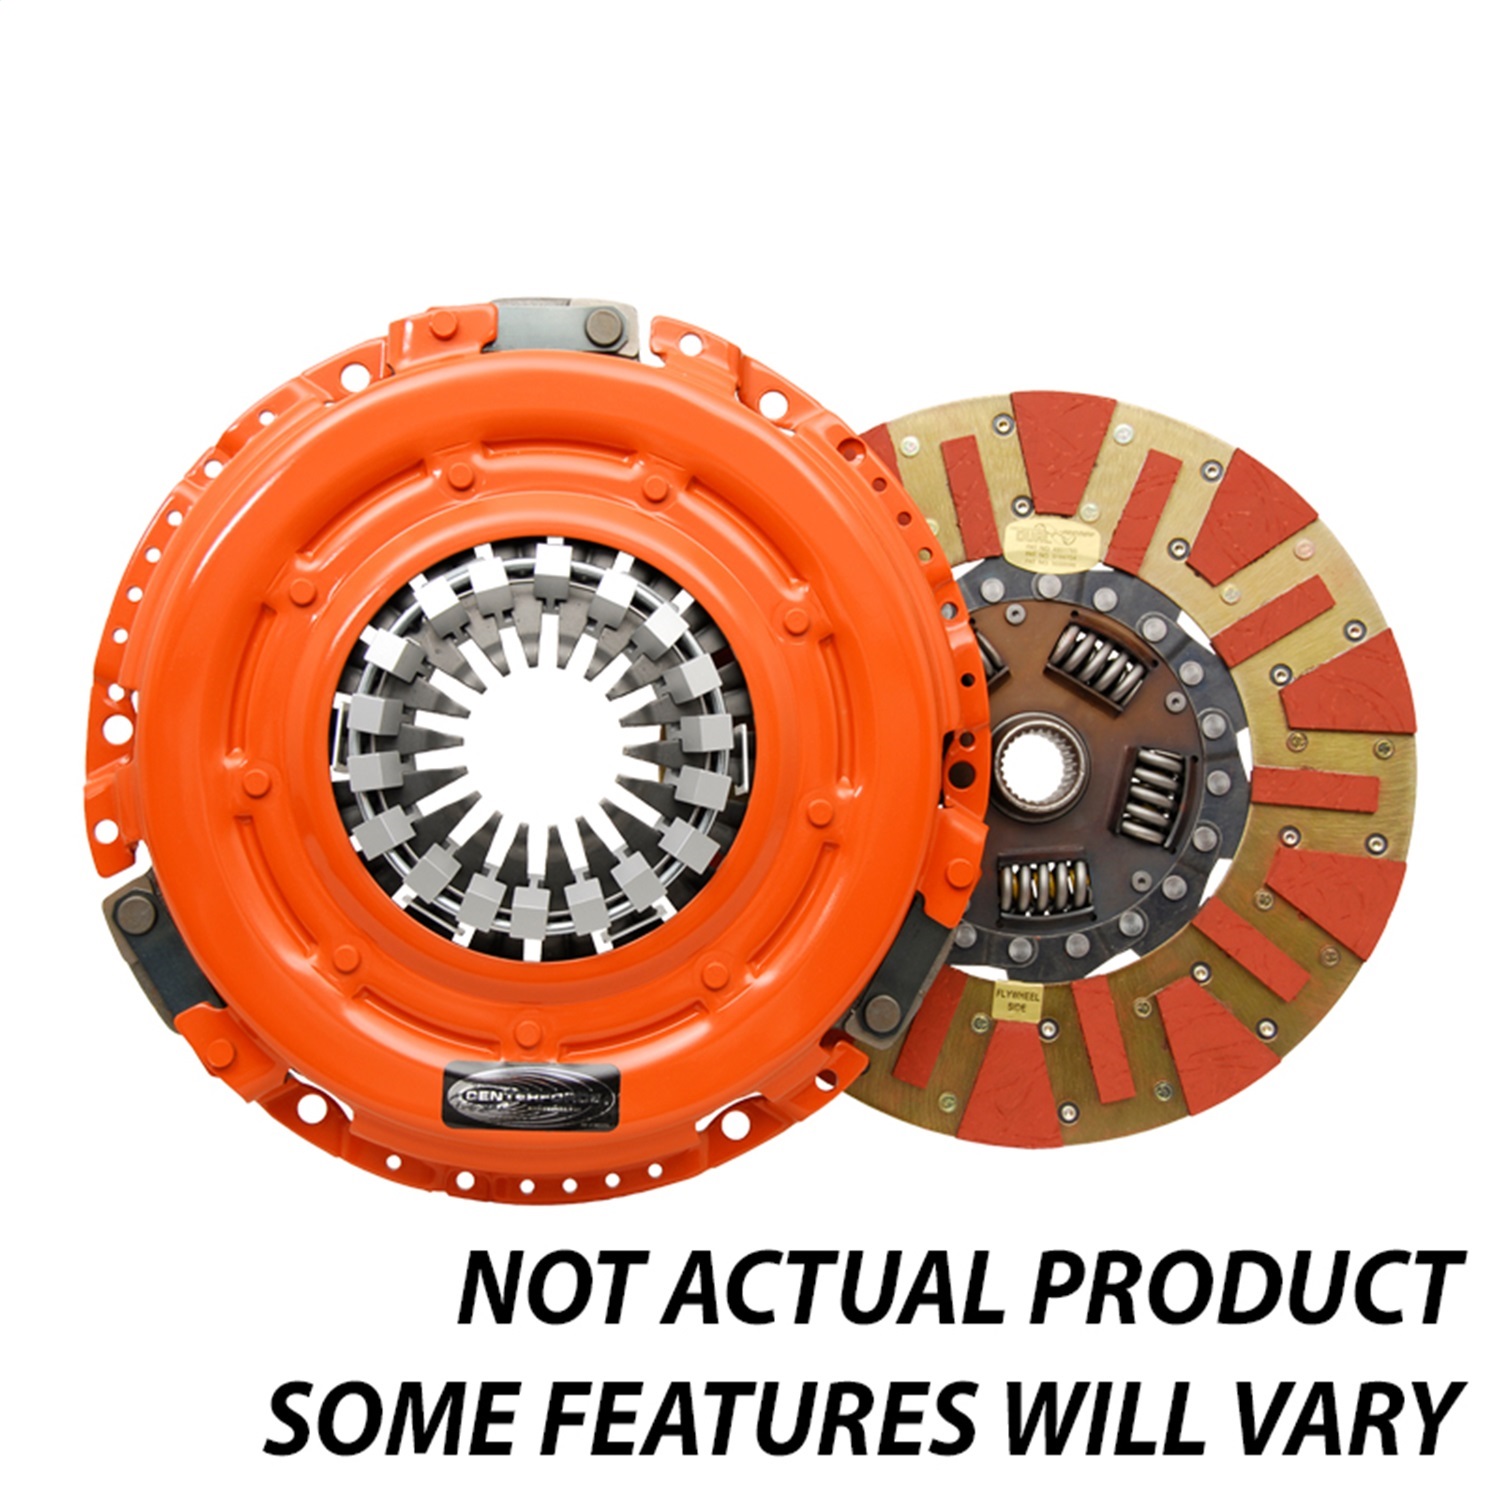 Centerforce Centerforce DF175810 Dual Friction Clutch Pressure Plate And Disc Set